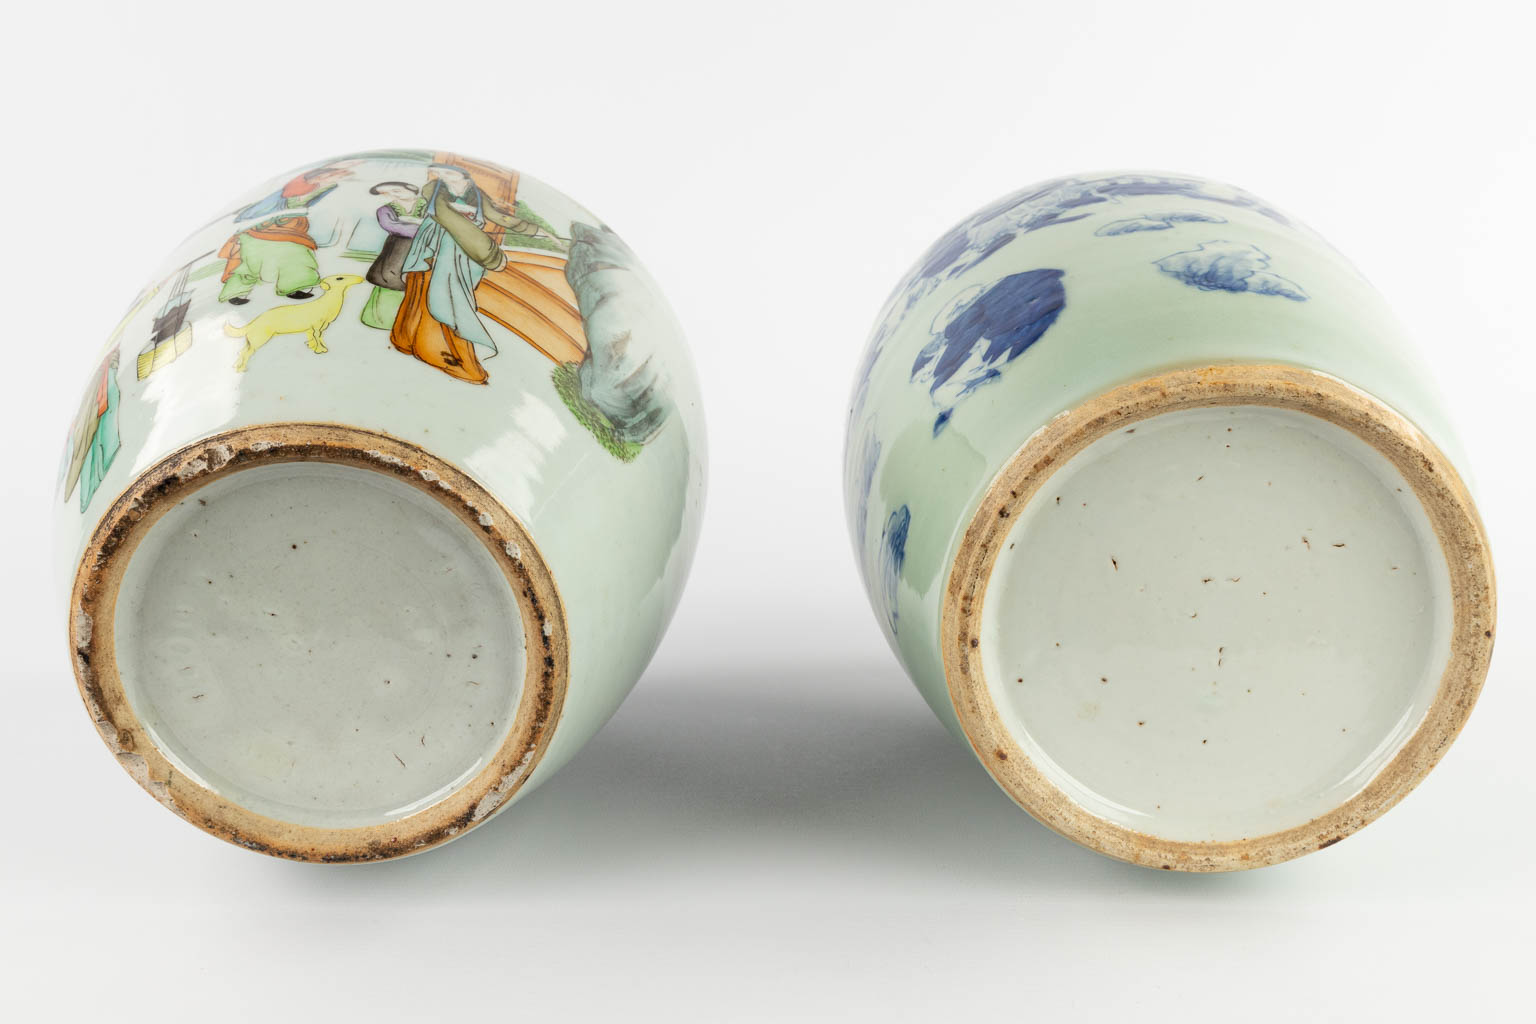 Two Chinese ginger jars, celadon and polychrome decor. 19th/20th C. (H:34 x D:22 cm)